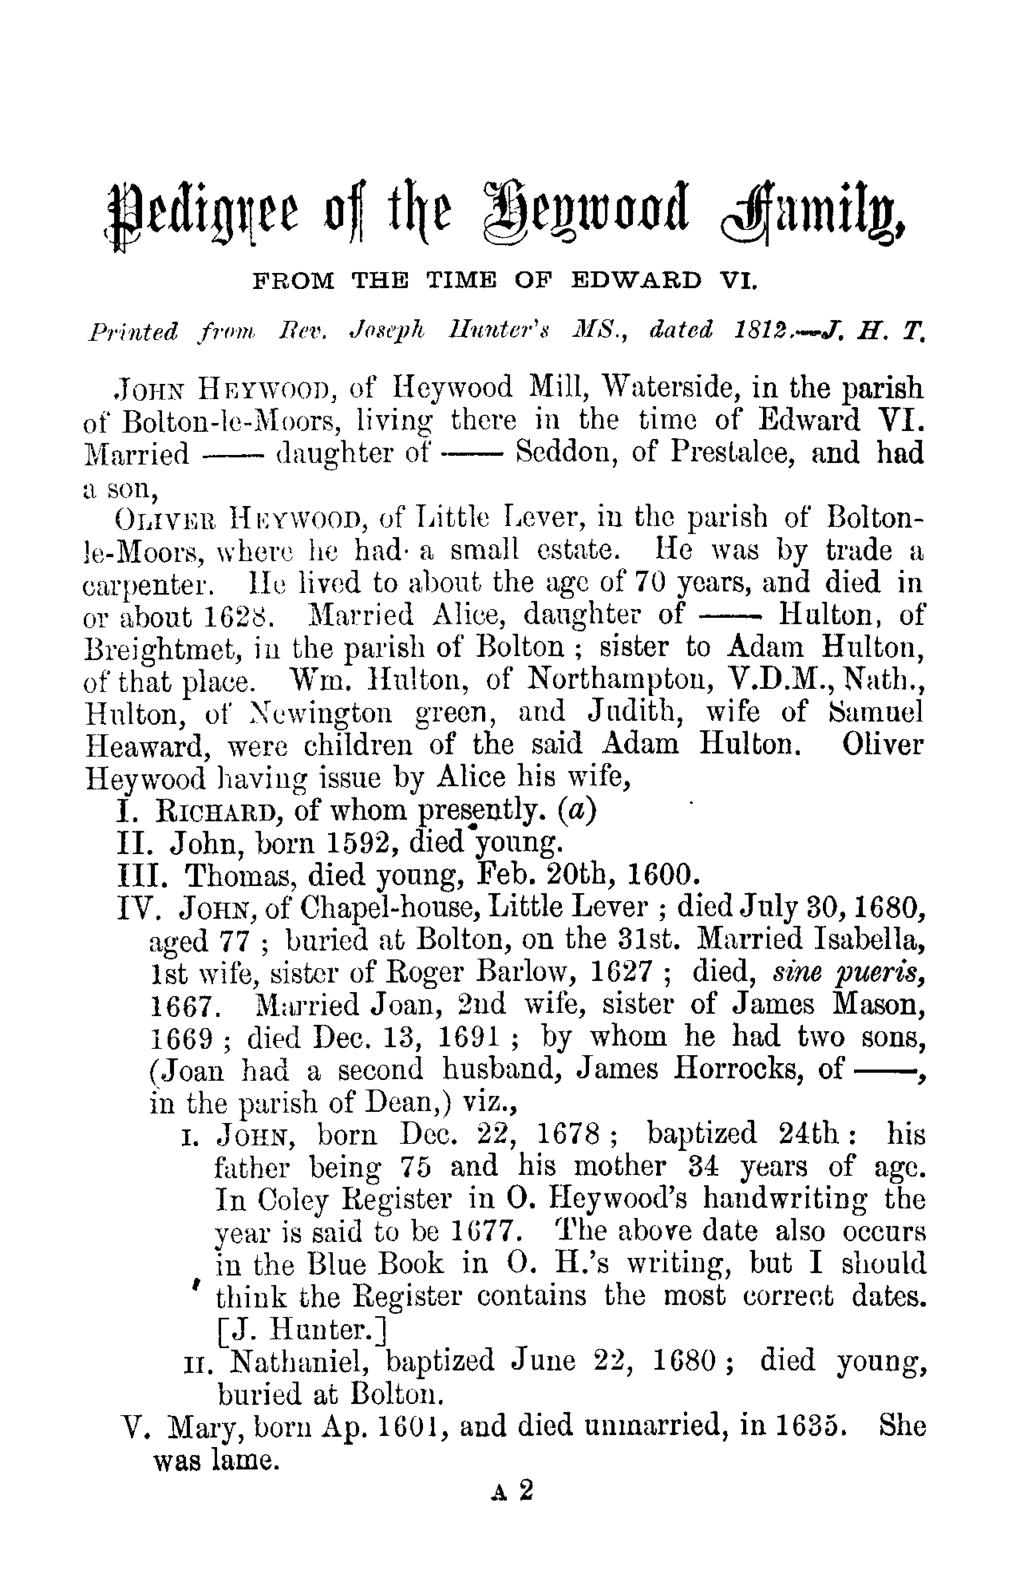 Pedigree of the Heywood Family, FROM THE TIME OF EDWARD VI. Printed front Rev. Joseph, Hunter's MS., dated 1812. J. H. T. JOT-IN HEYwood, of Heywood Mill, Waterside, in the parish of Bolton-le-Moors, living there in the time of Edward VI.